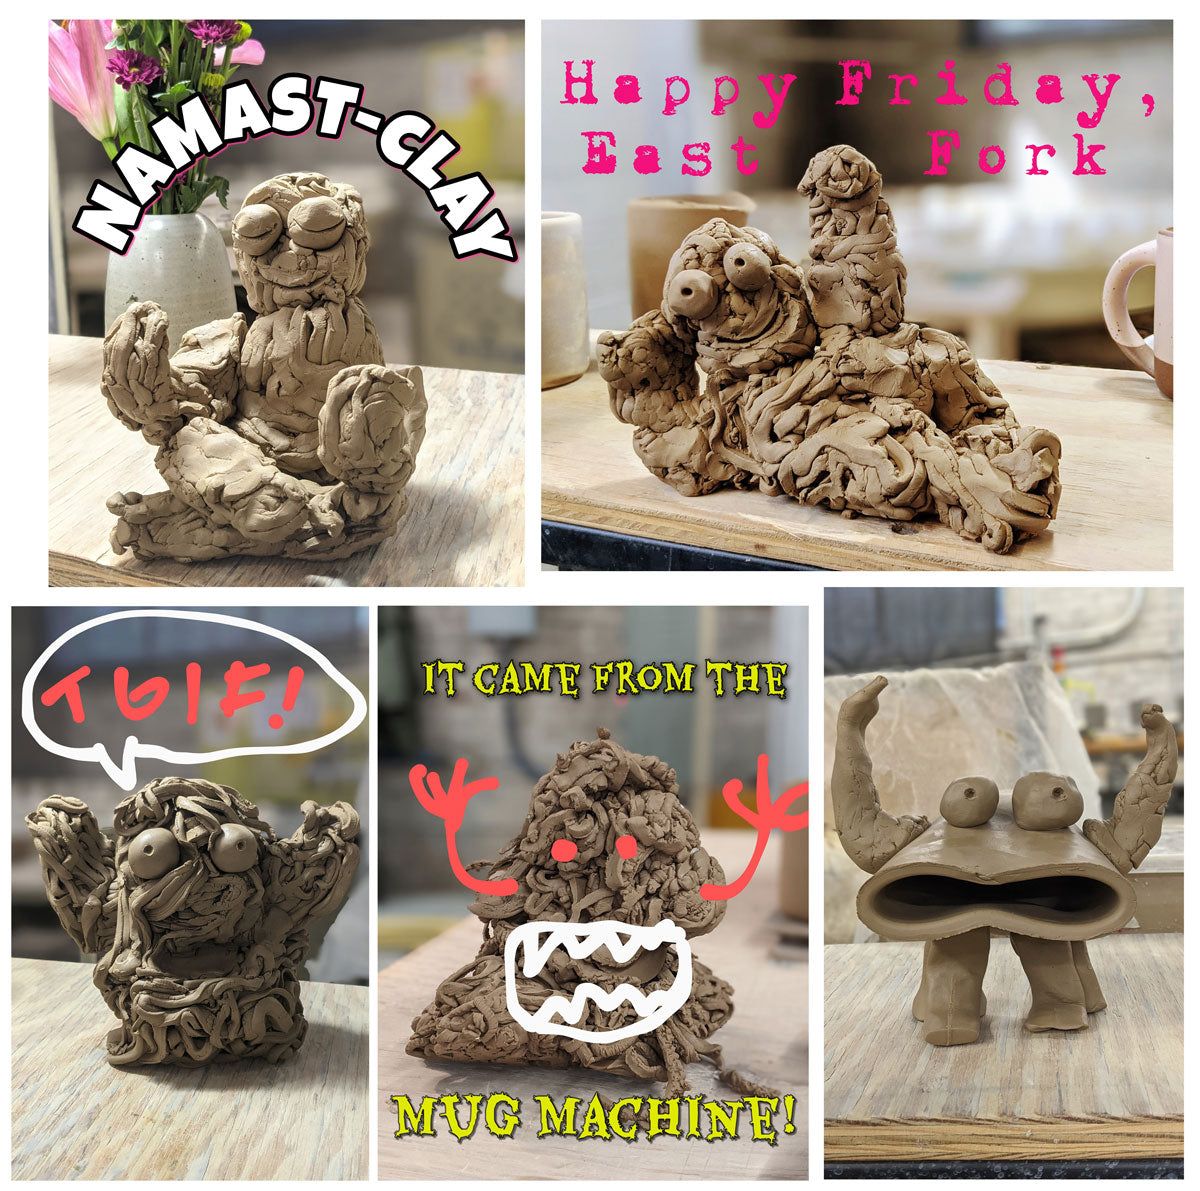 Whimsical clay creatures made from scraps at the warehouse Donnie uses to brighten everyone's day.